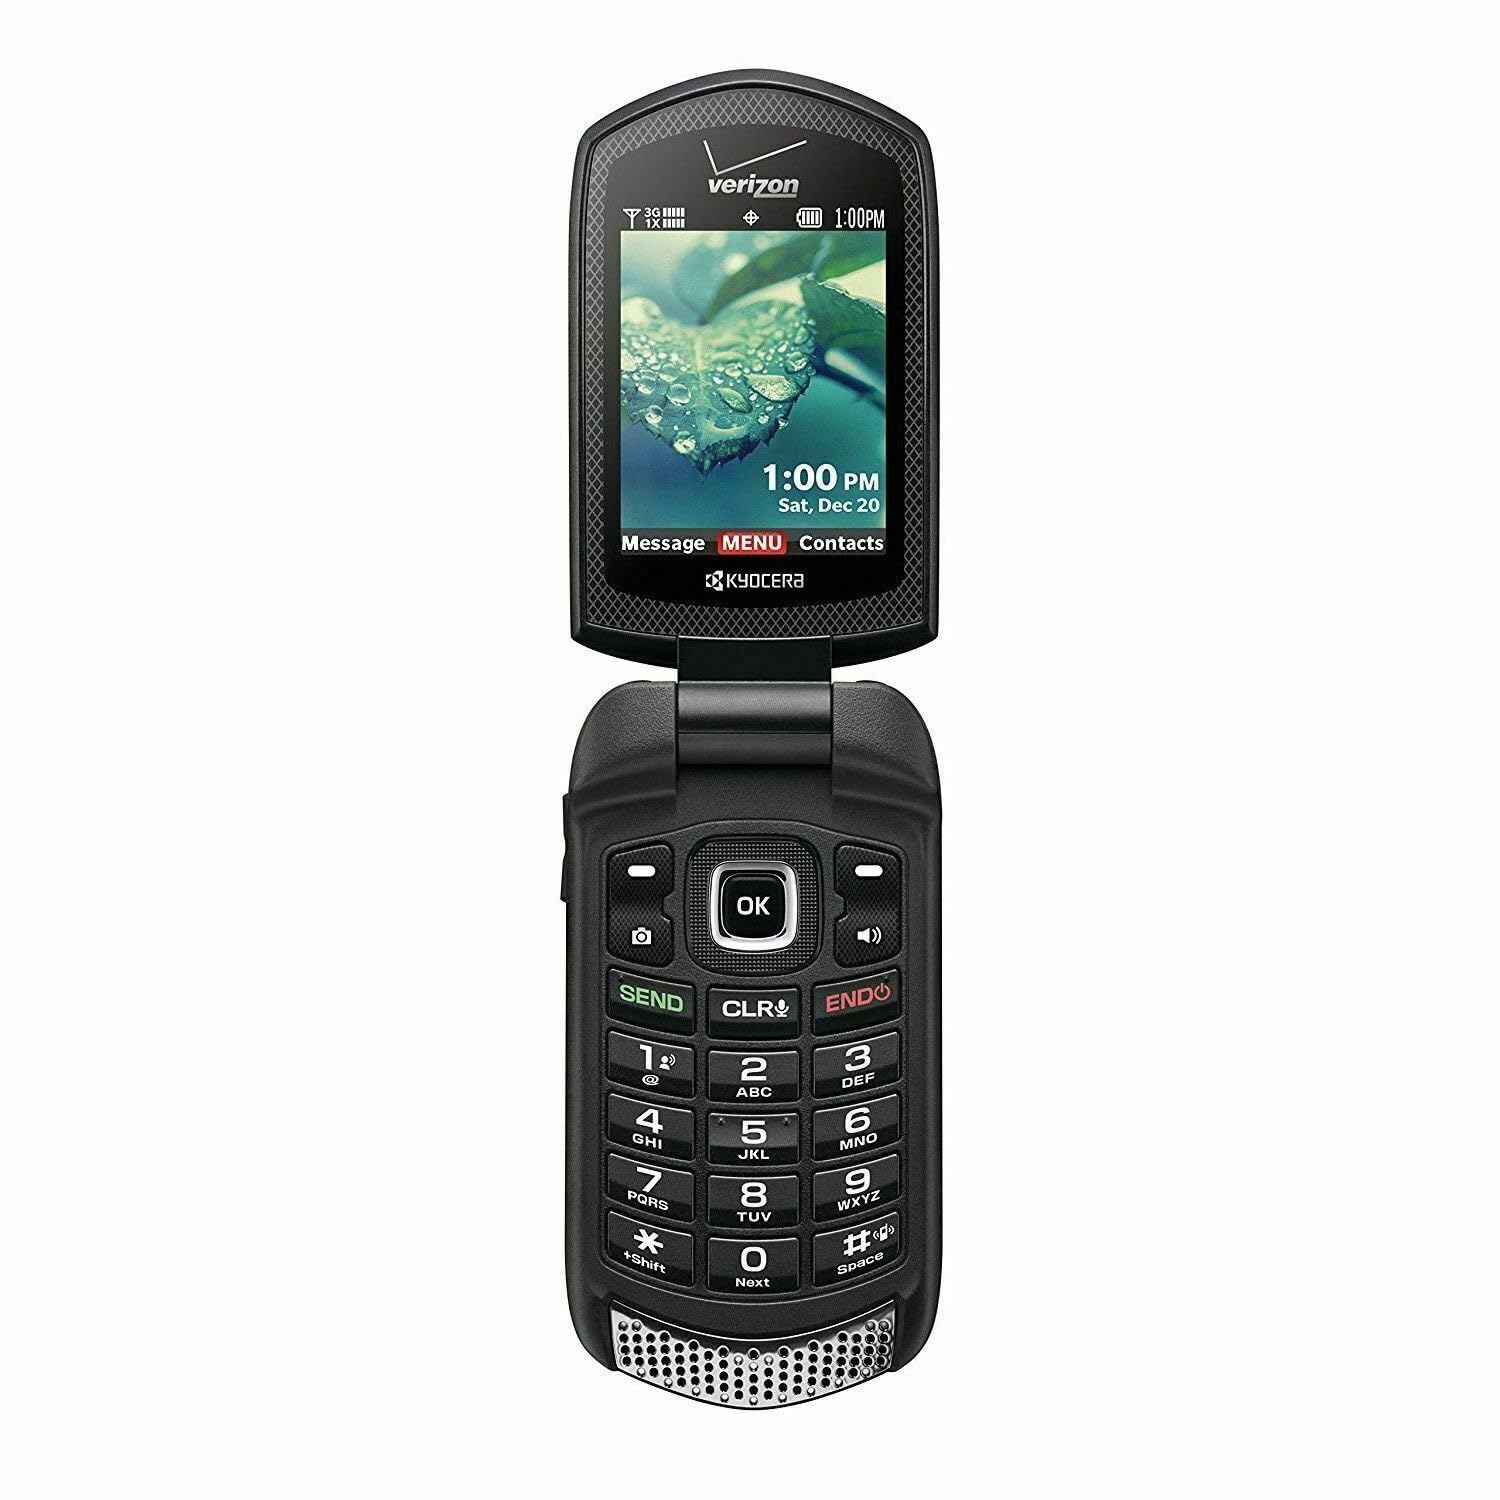 How To Turn Off Voice Recognition On Kyocera Flip Phone